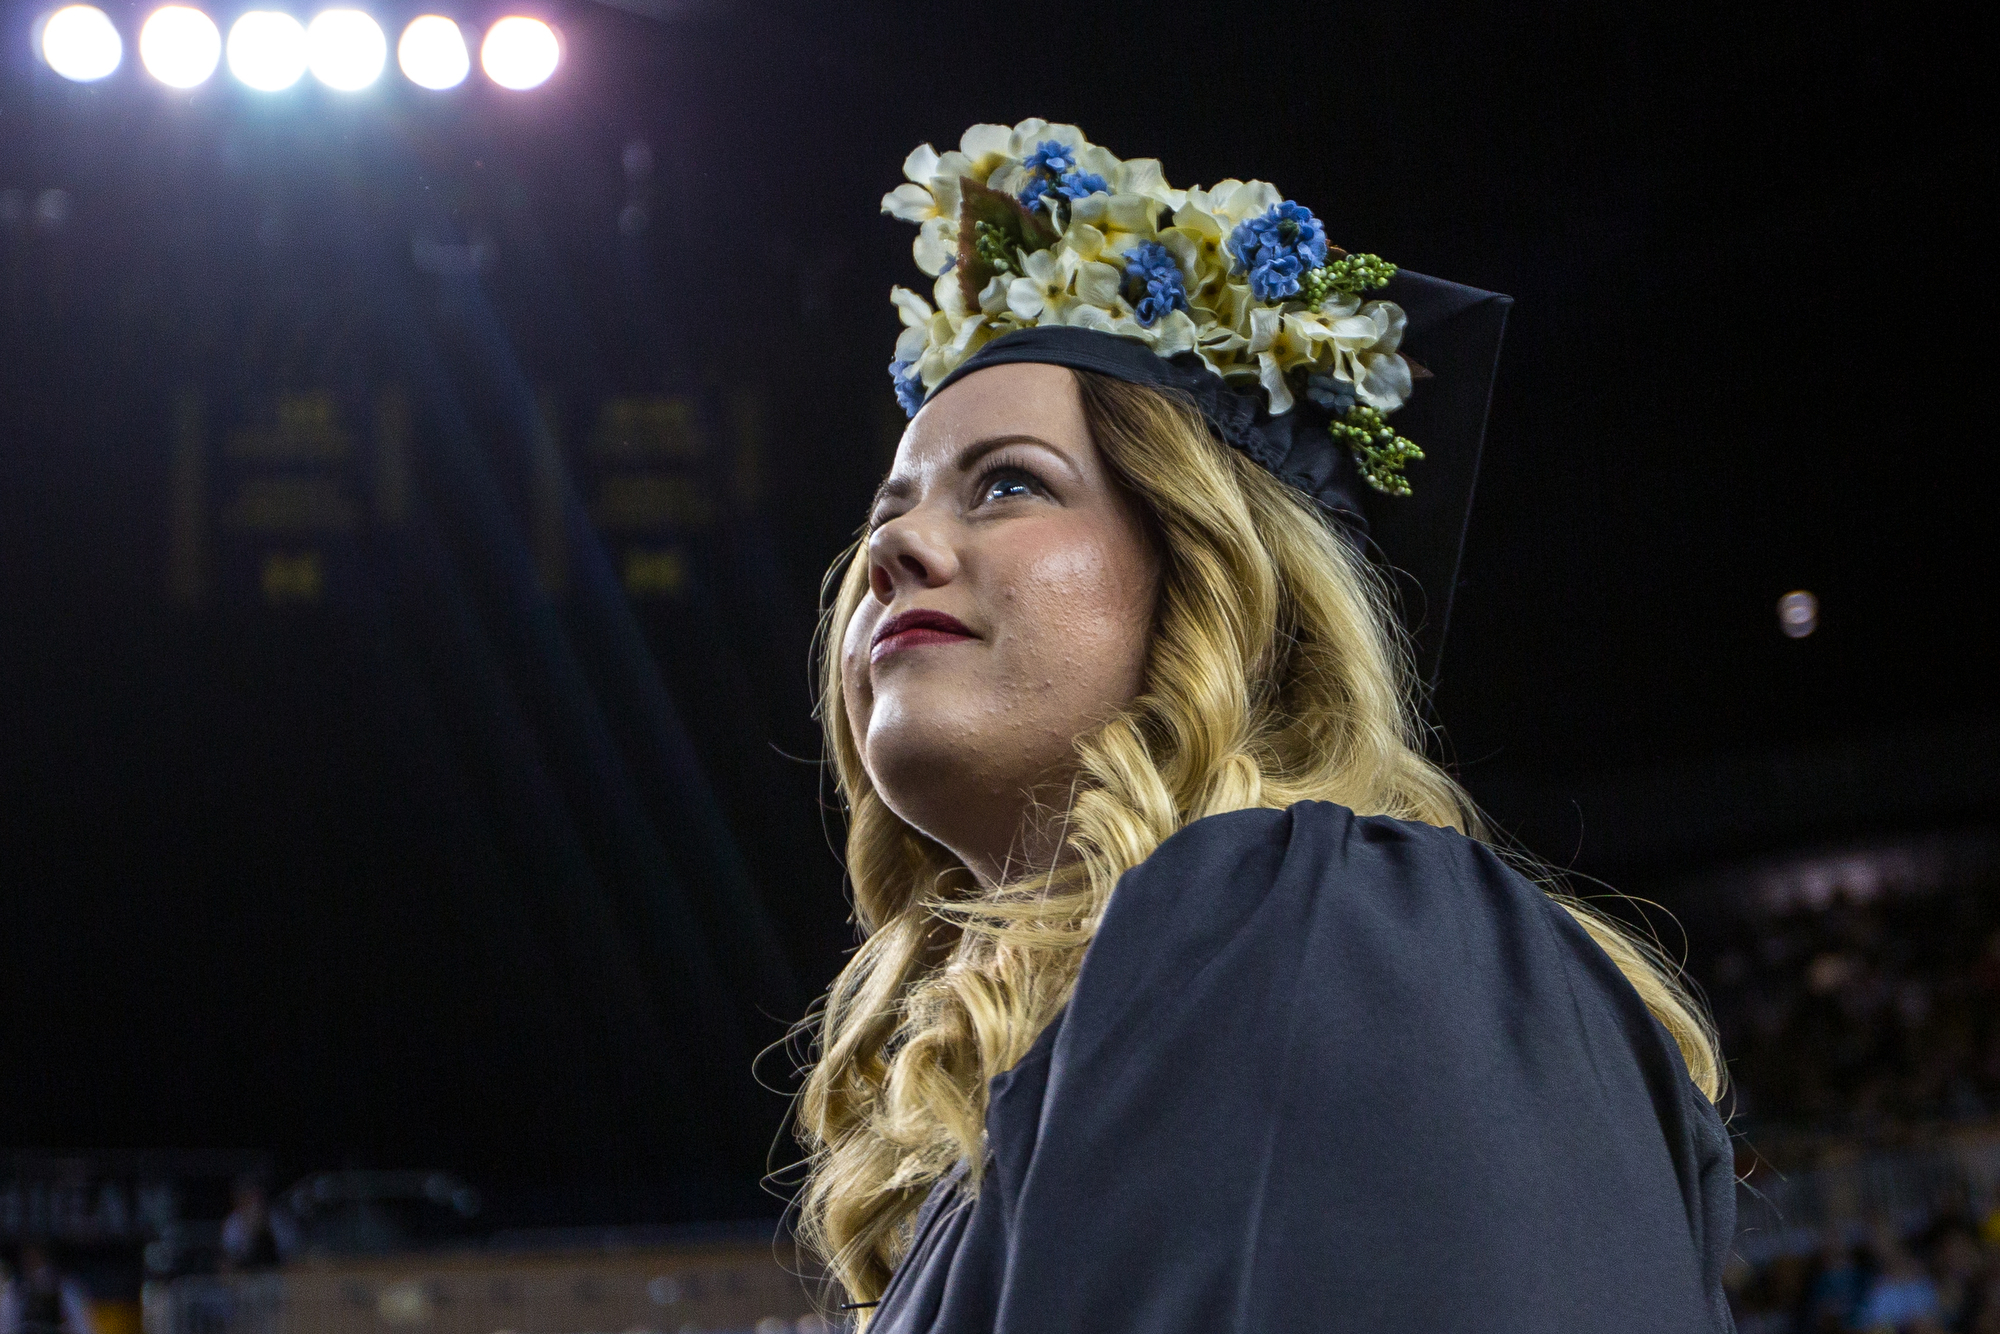  A graduating student looks un into the crowd to locate her family before walking onto stage during the University of Michigan winter commencement at the Crisler Arena on Sunday, December 18, 2016. About 1,000 other students graduated at the Crisler 